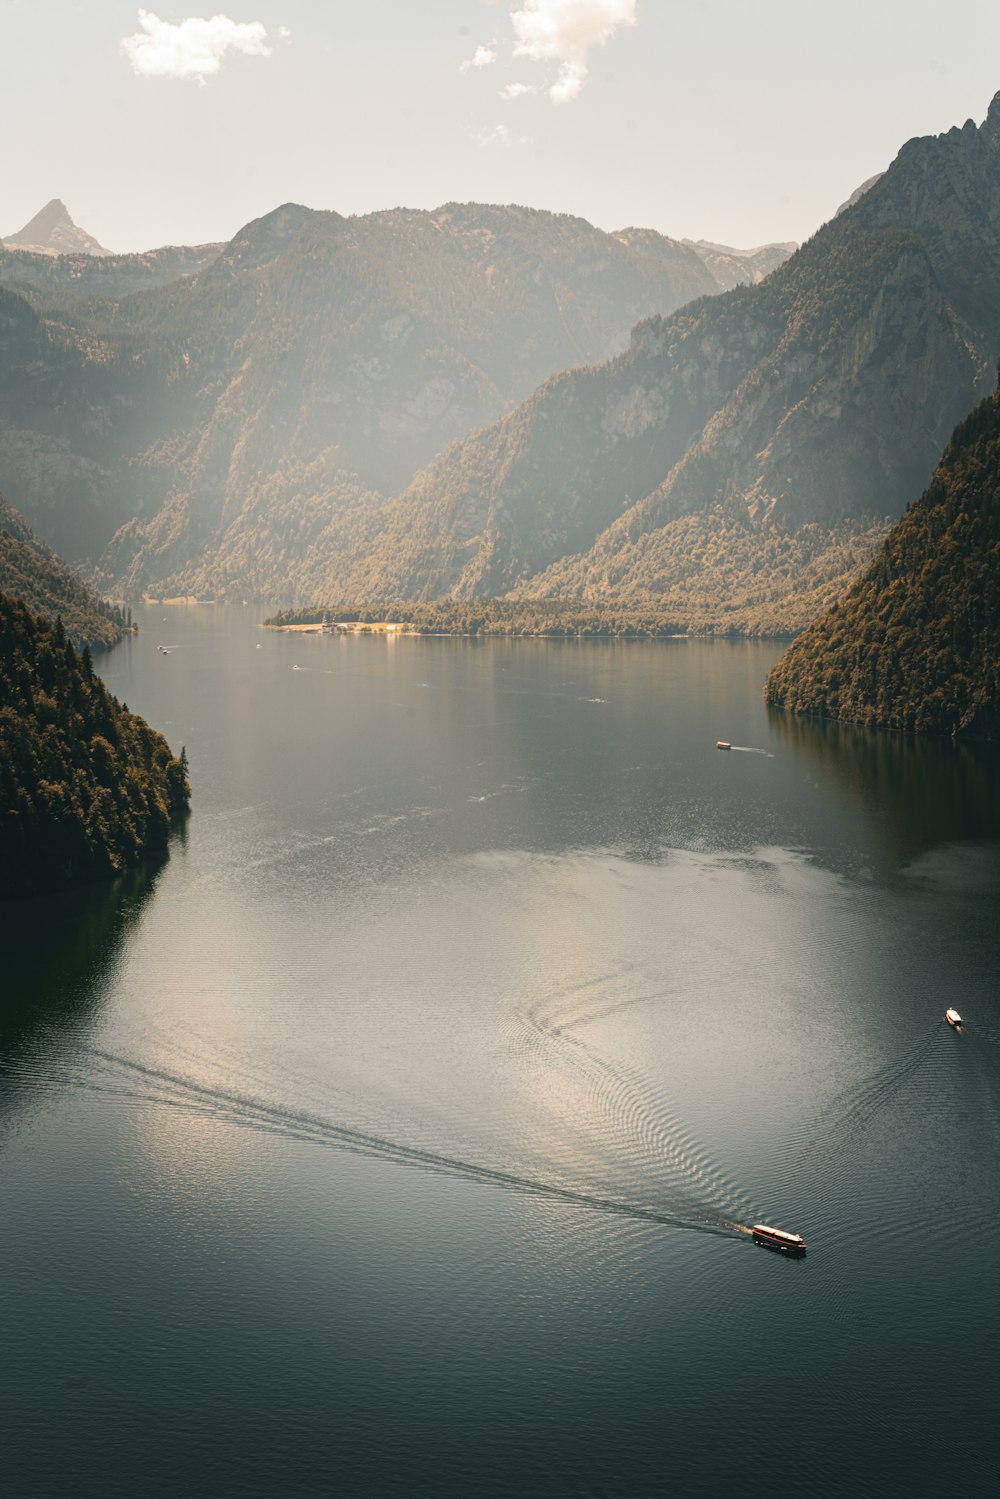 a boat is in the middle of a lake surrounded by mountains